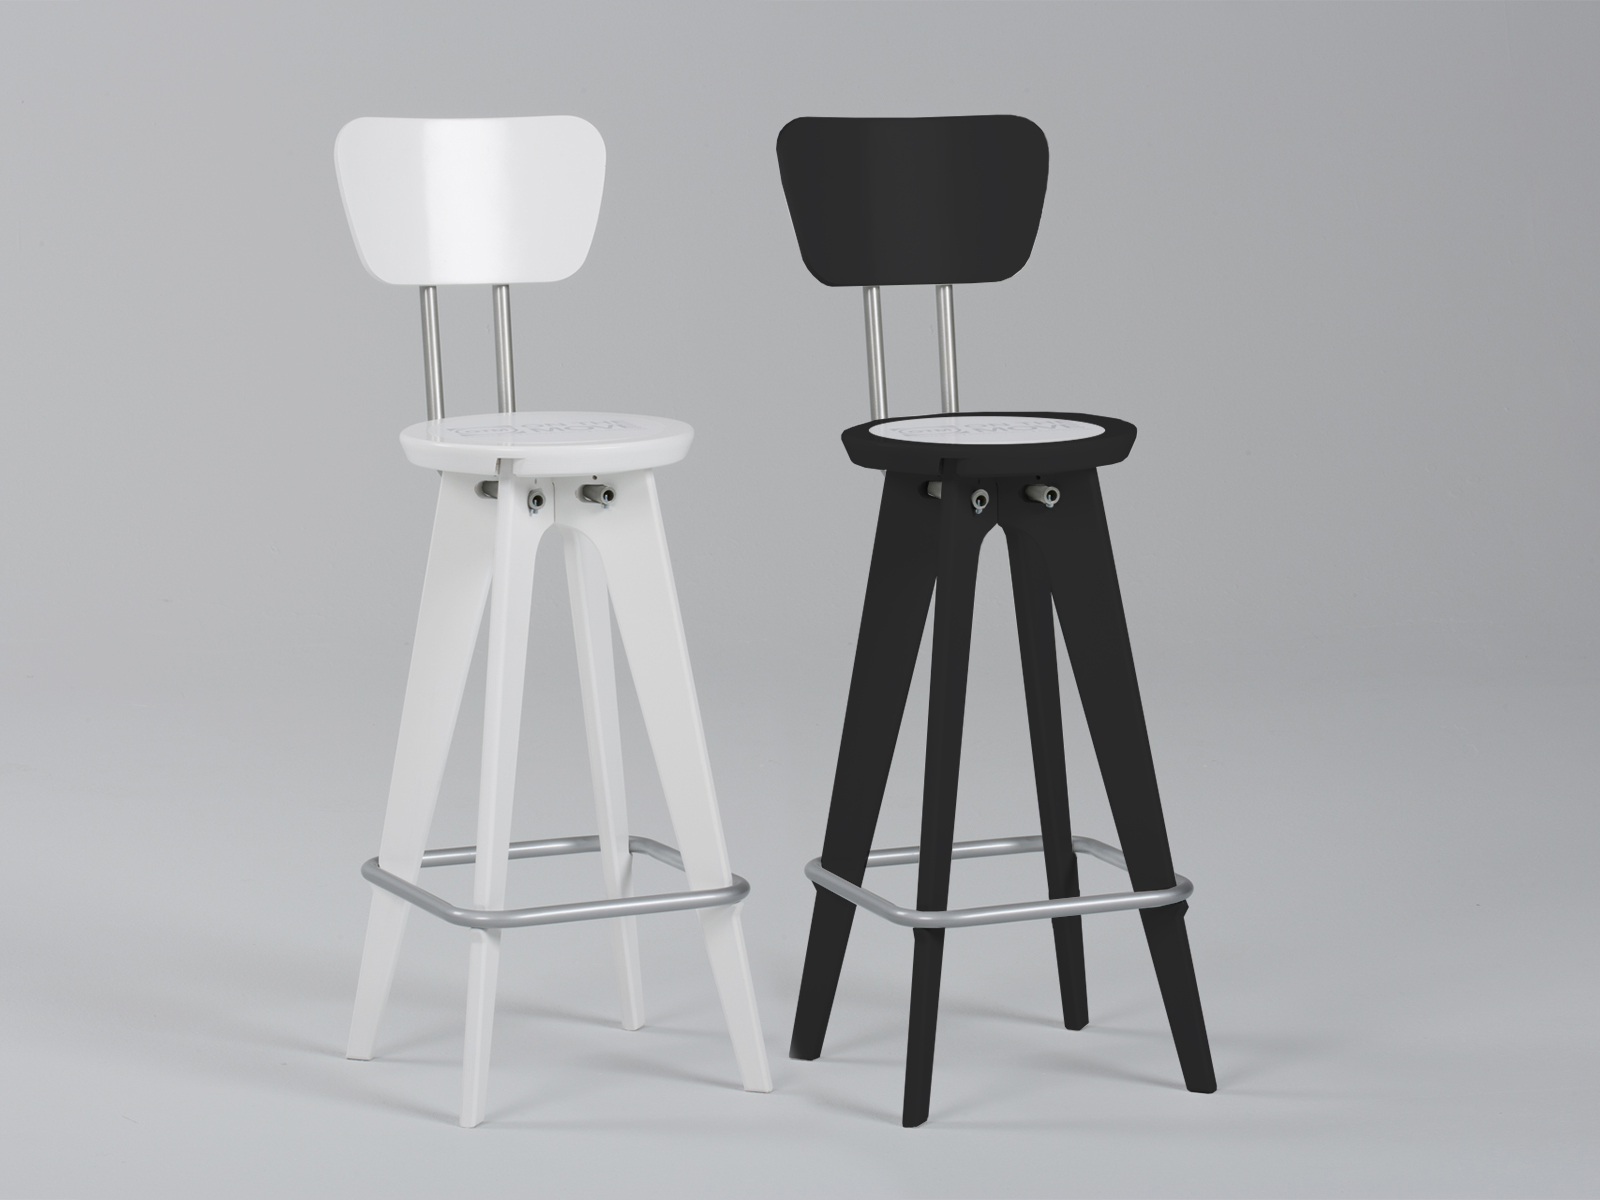 Chairs with Seatback Option -- White and Black Only